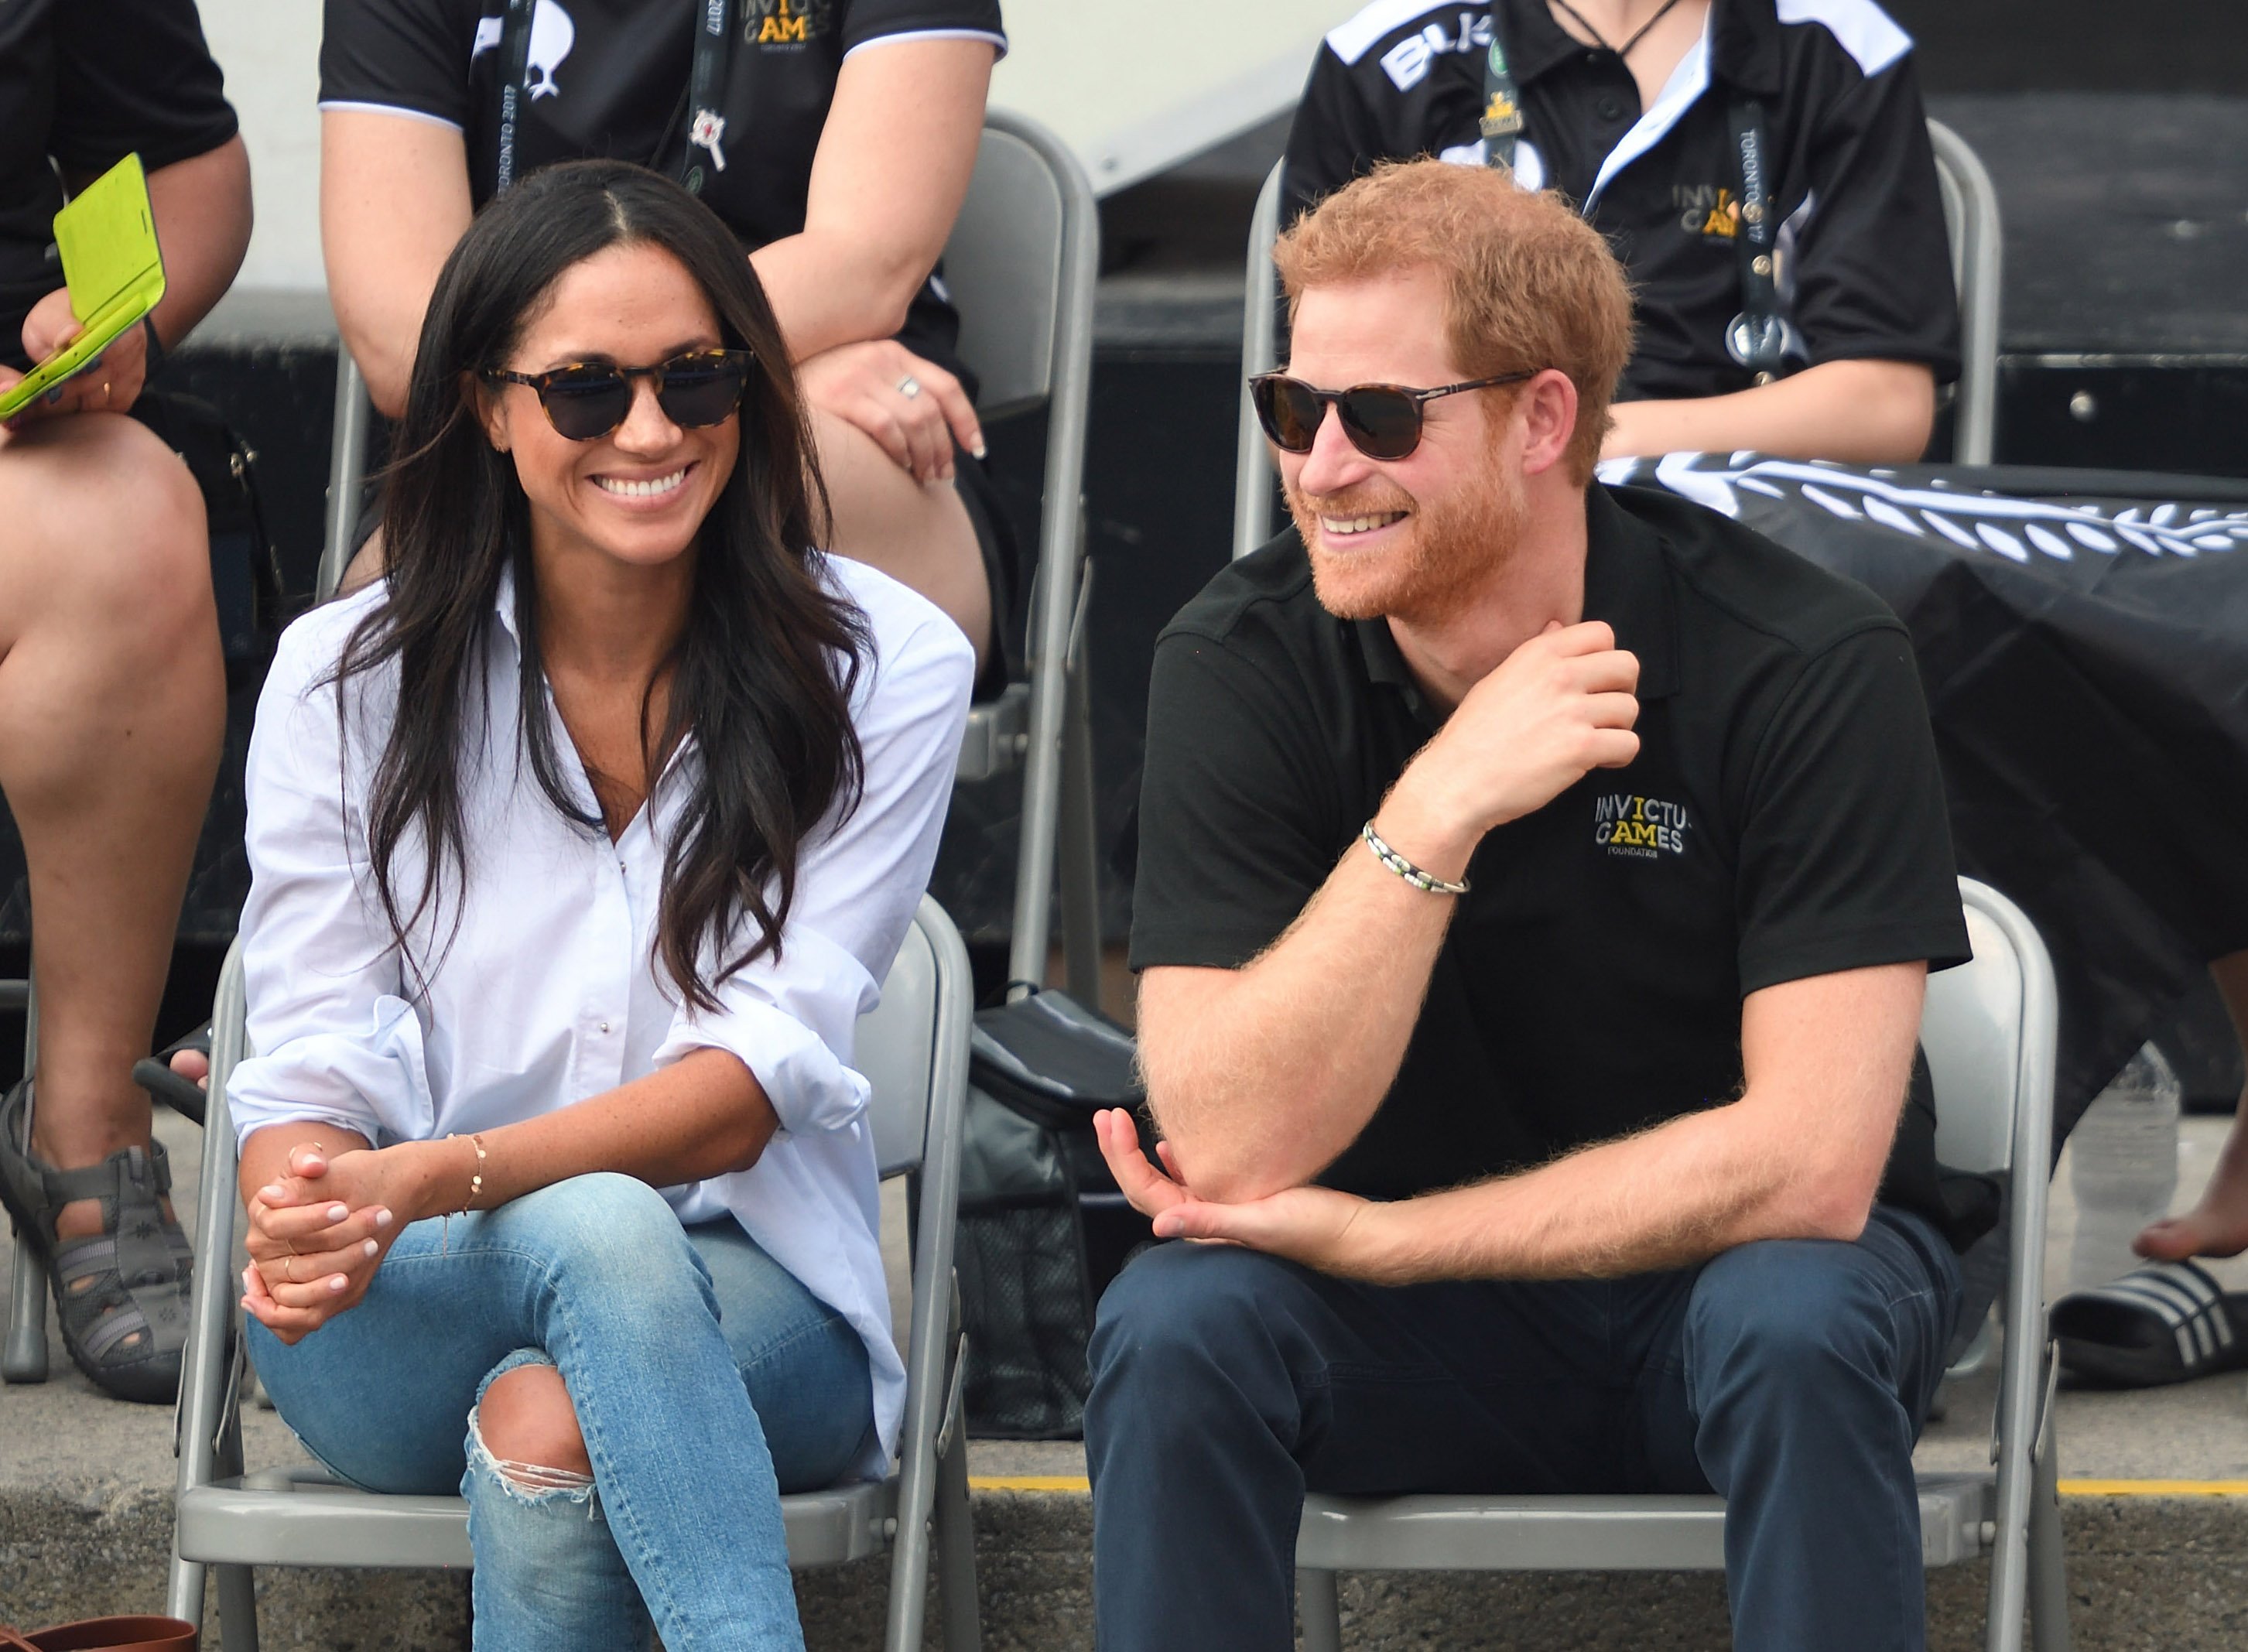 Meghan Markle and Prince Harry at the Invictus Games on September 25, 2017, in Toronto, Canada | Source: Getty Images